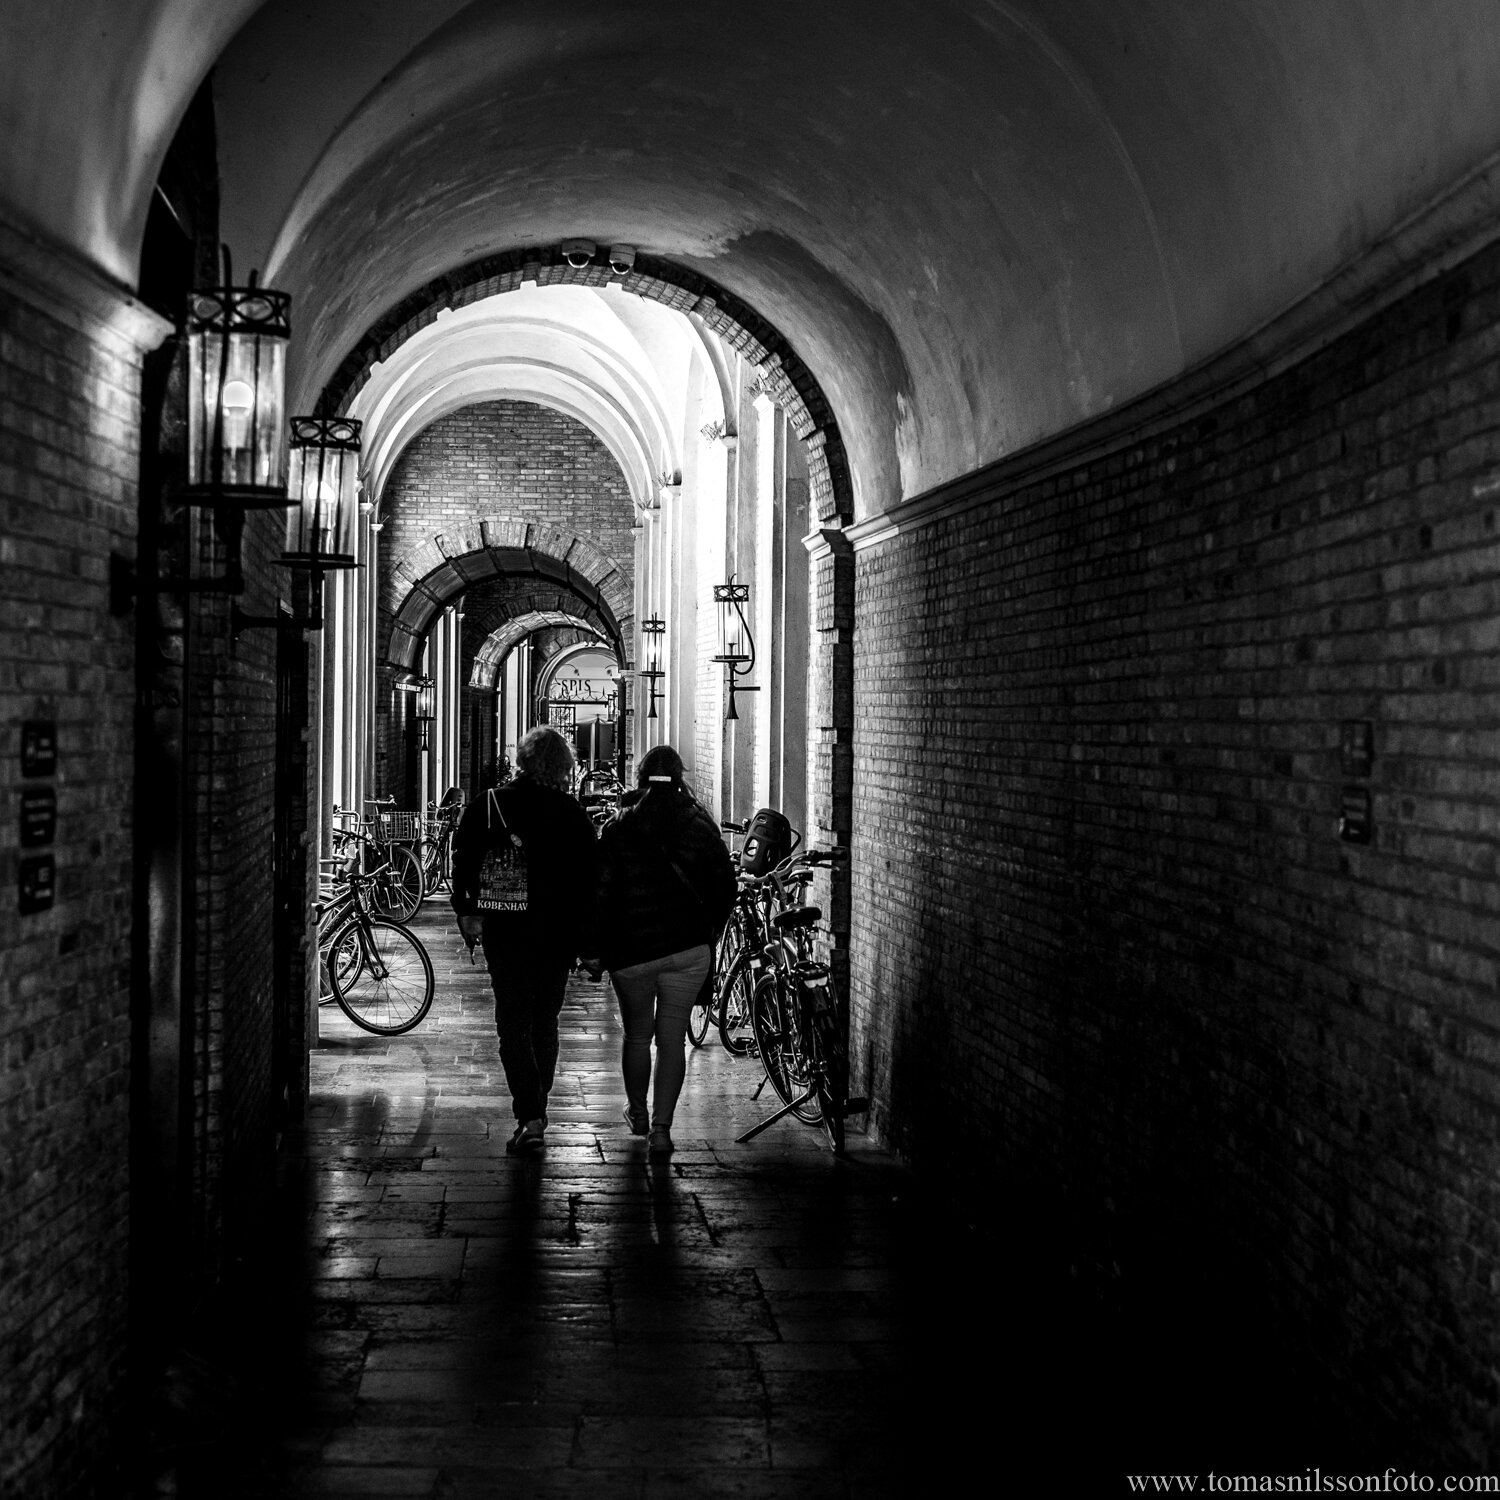 Day 240 - August 28: Through the tunnel